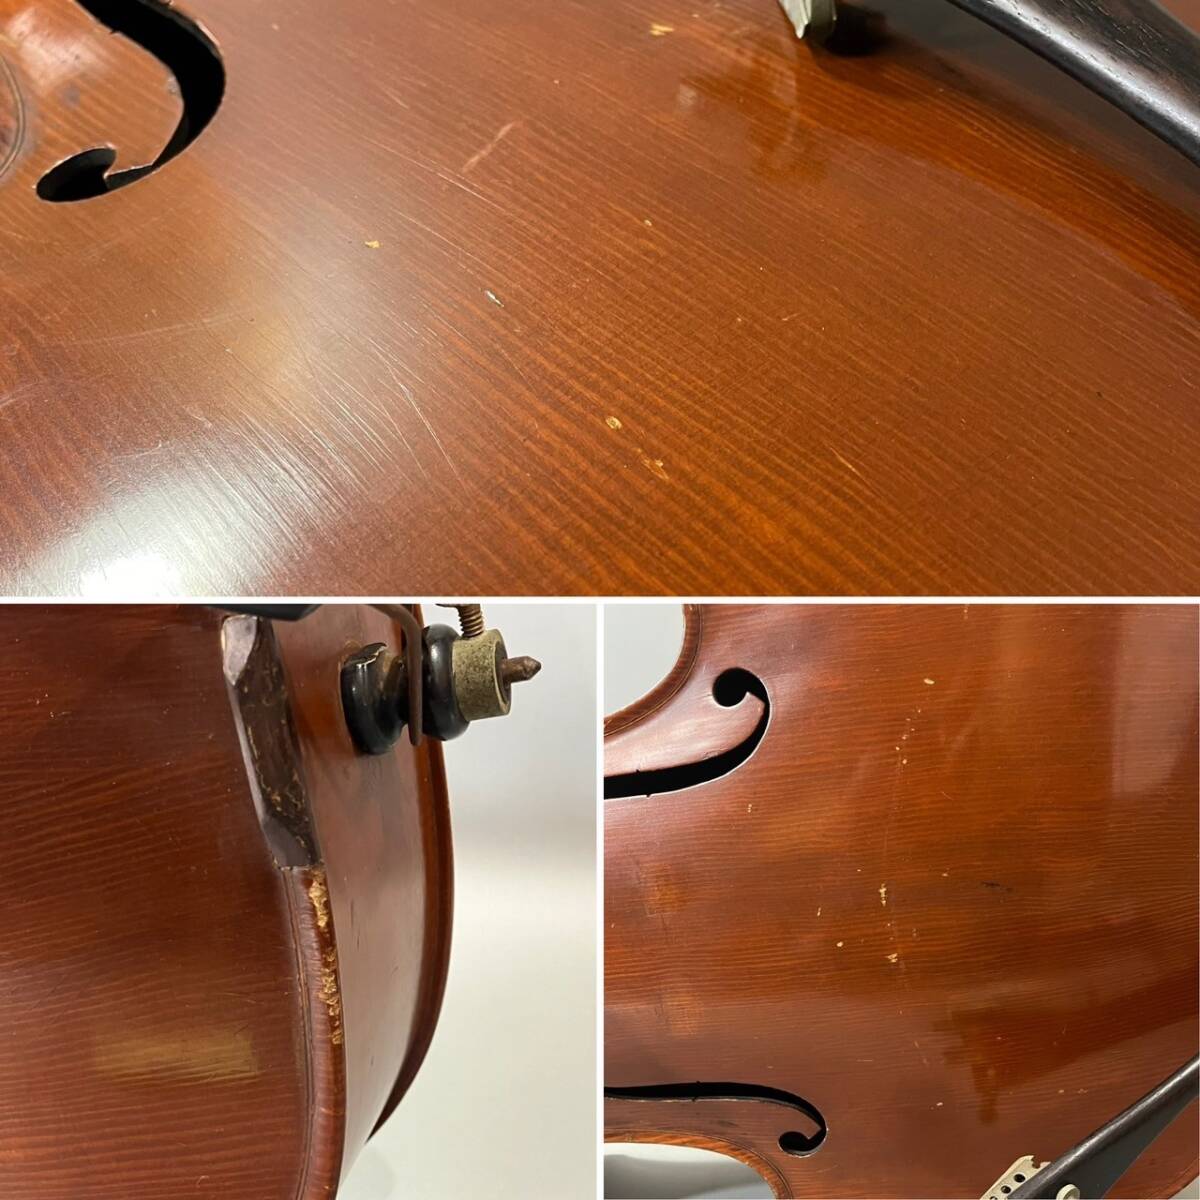 RS254 direct pickup OK gibson Gibson CELLO contrabass model.G-110-542 Kalamazoo, Mich. U.S.A. Junk ( inspection ) stringed instruments used Vintage 